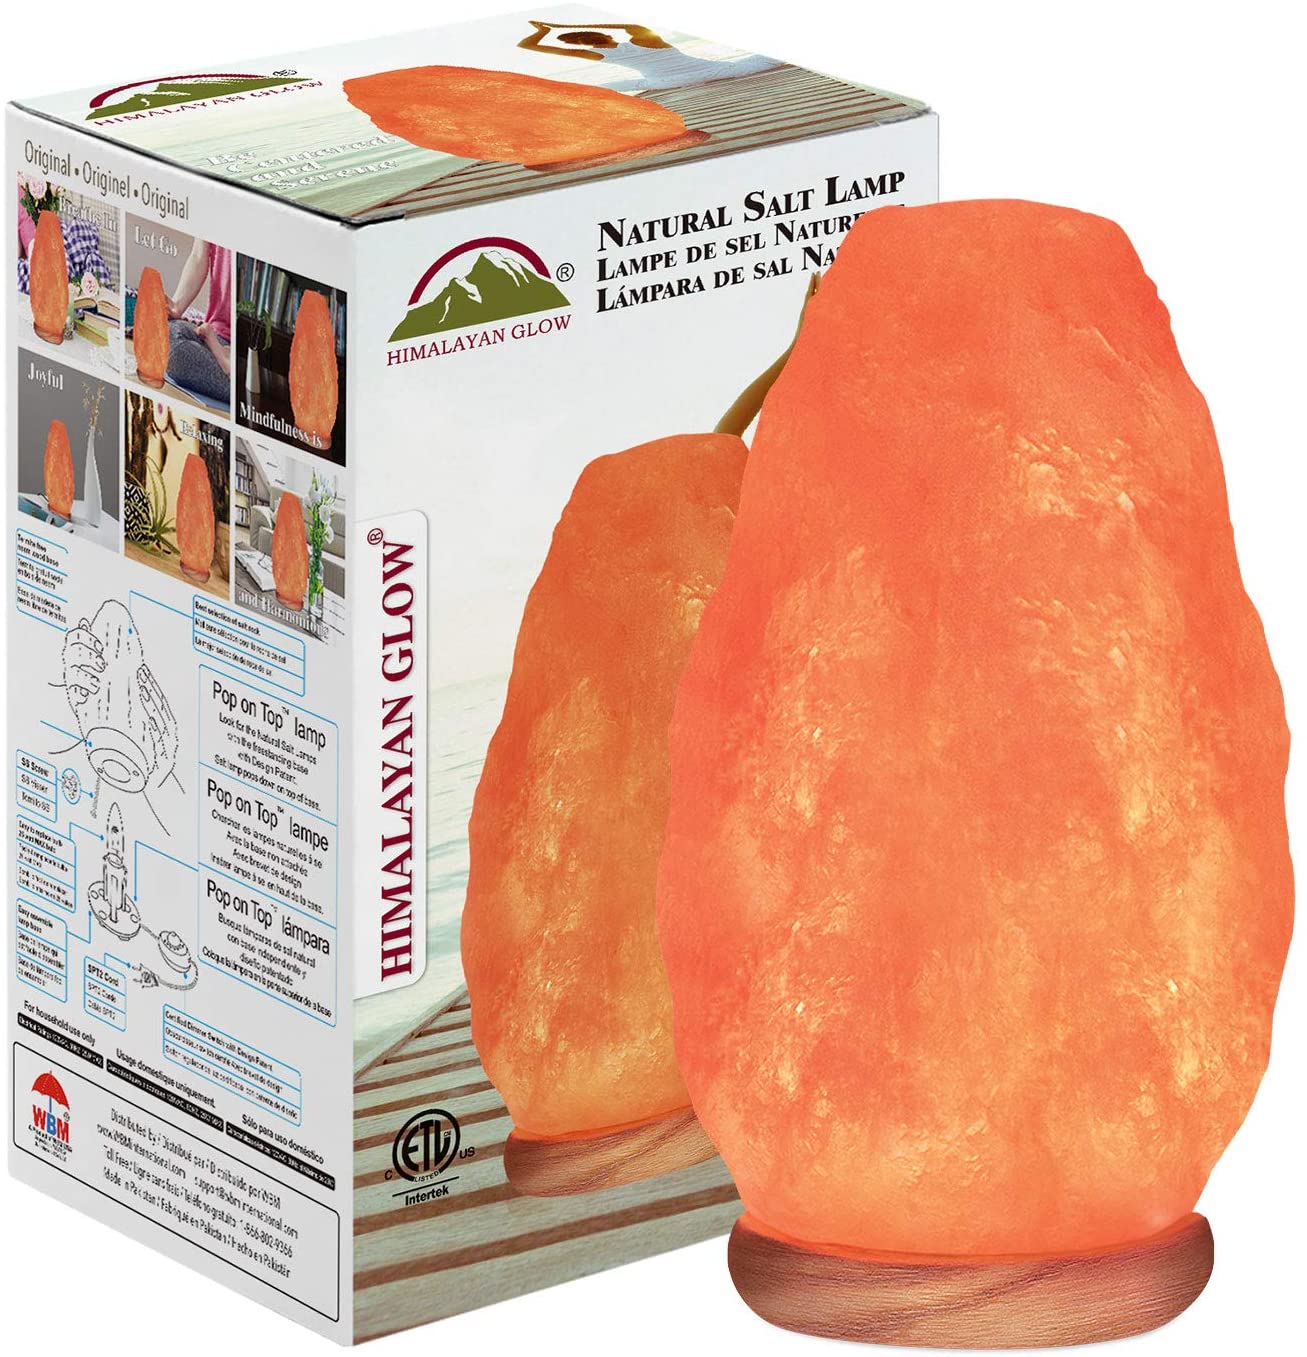 The Best Salt Lamps To Add A Cool Vibe To Your Home | March 2022